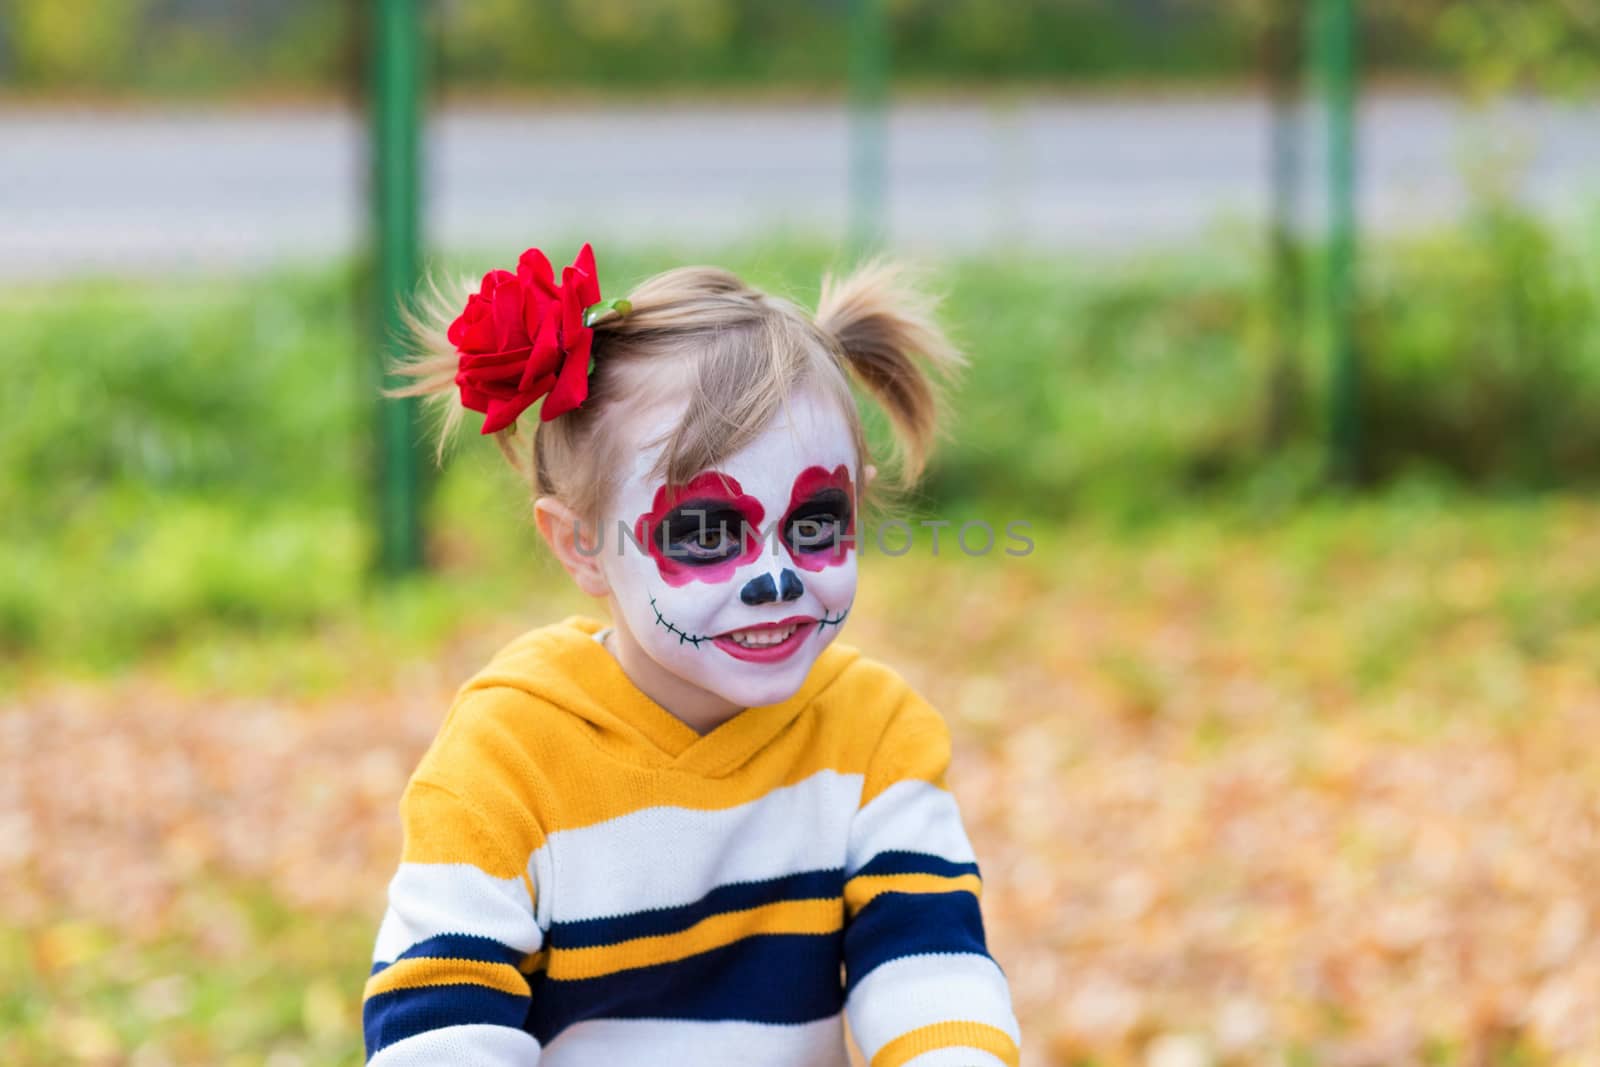 A little girl with Painted Face, smiling at the camera on Day of the Dead.. by galinasharapova